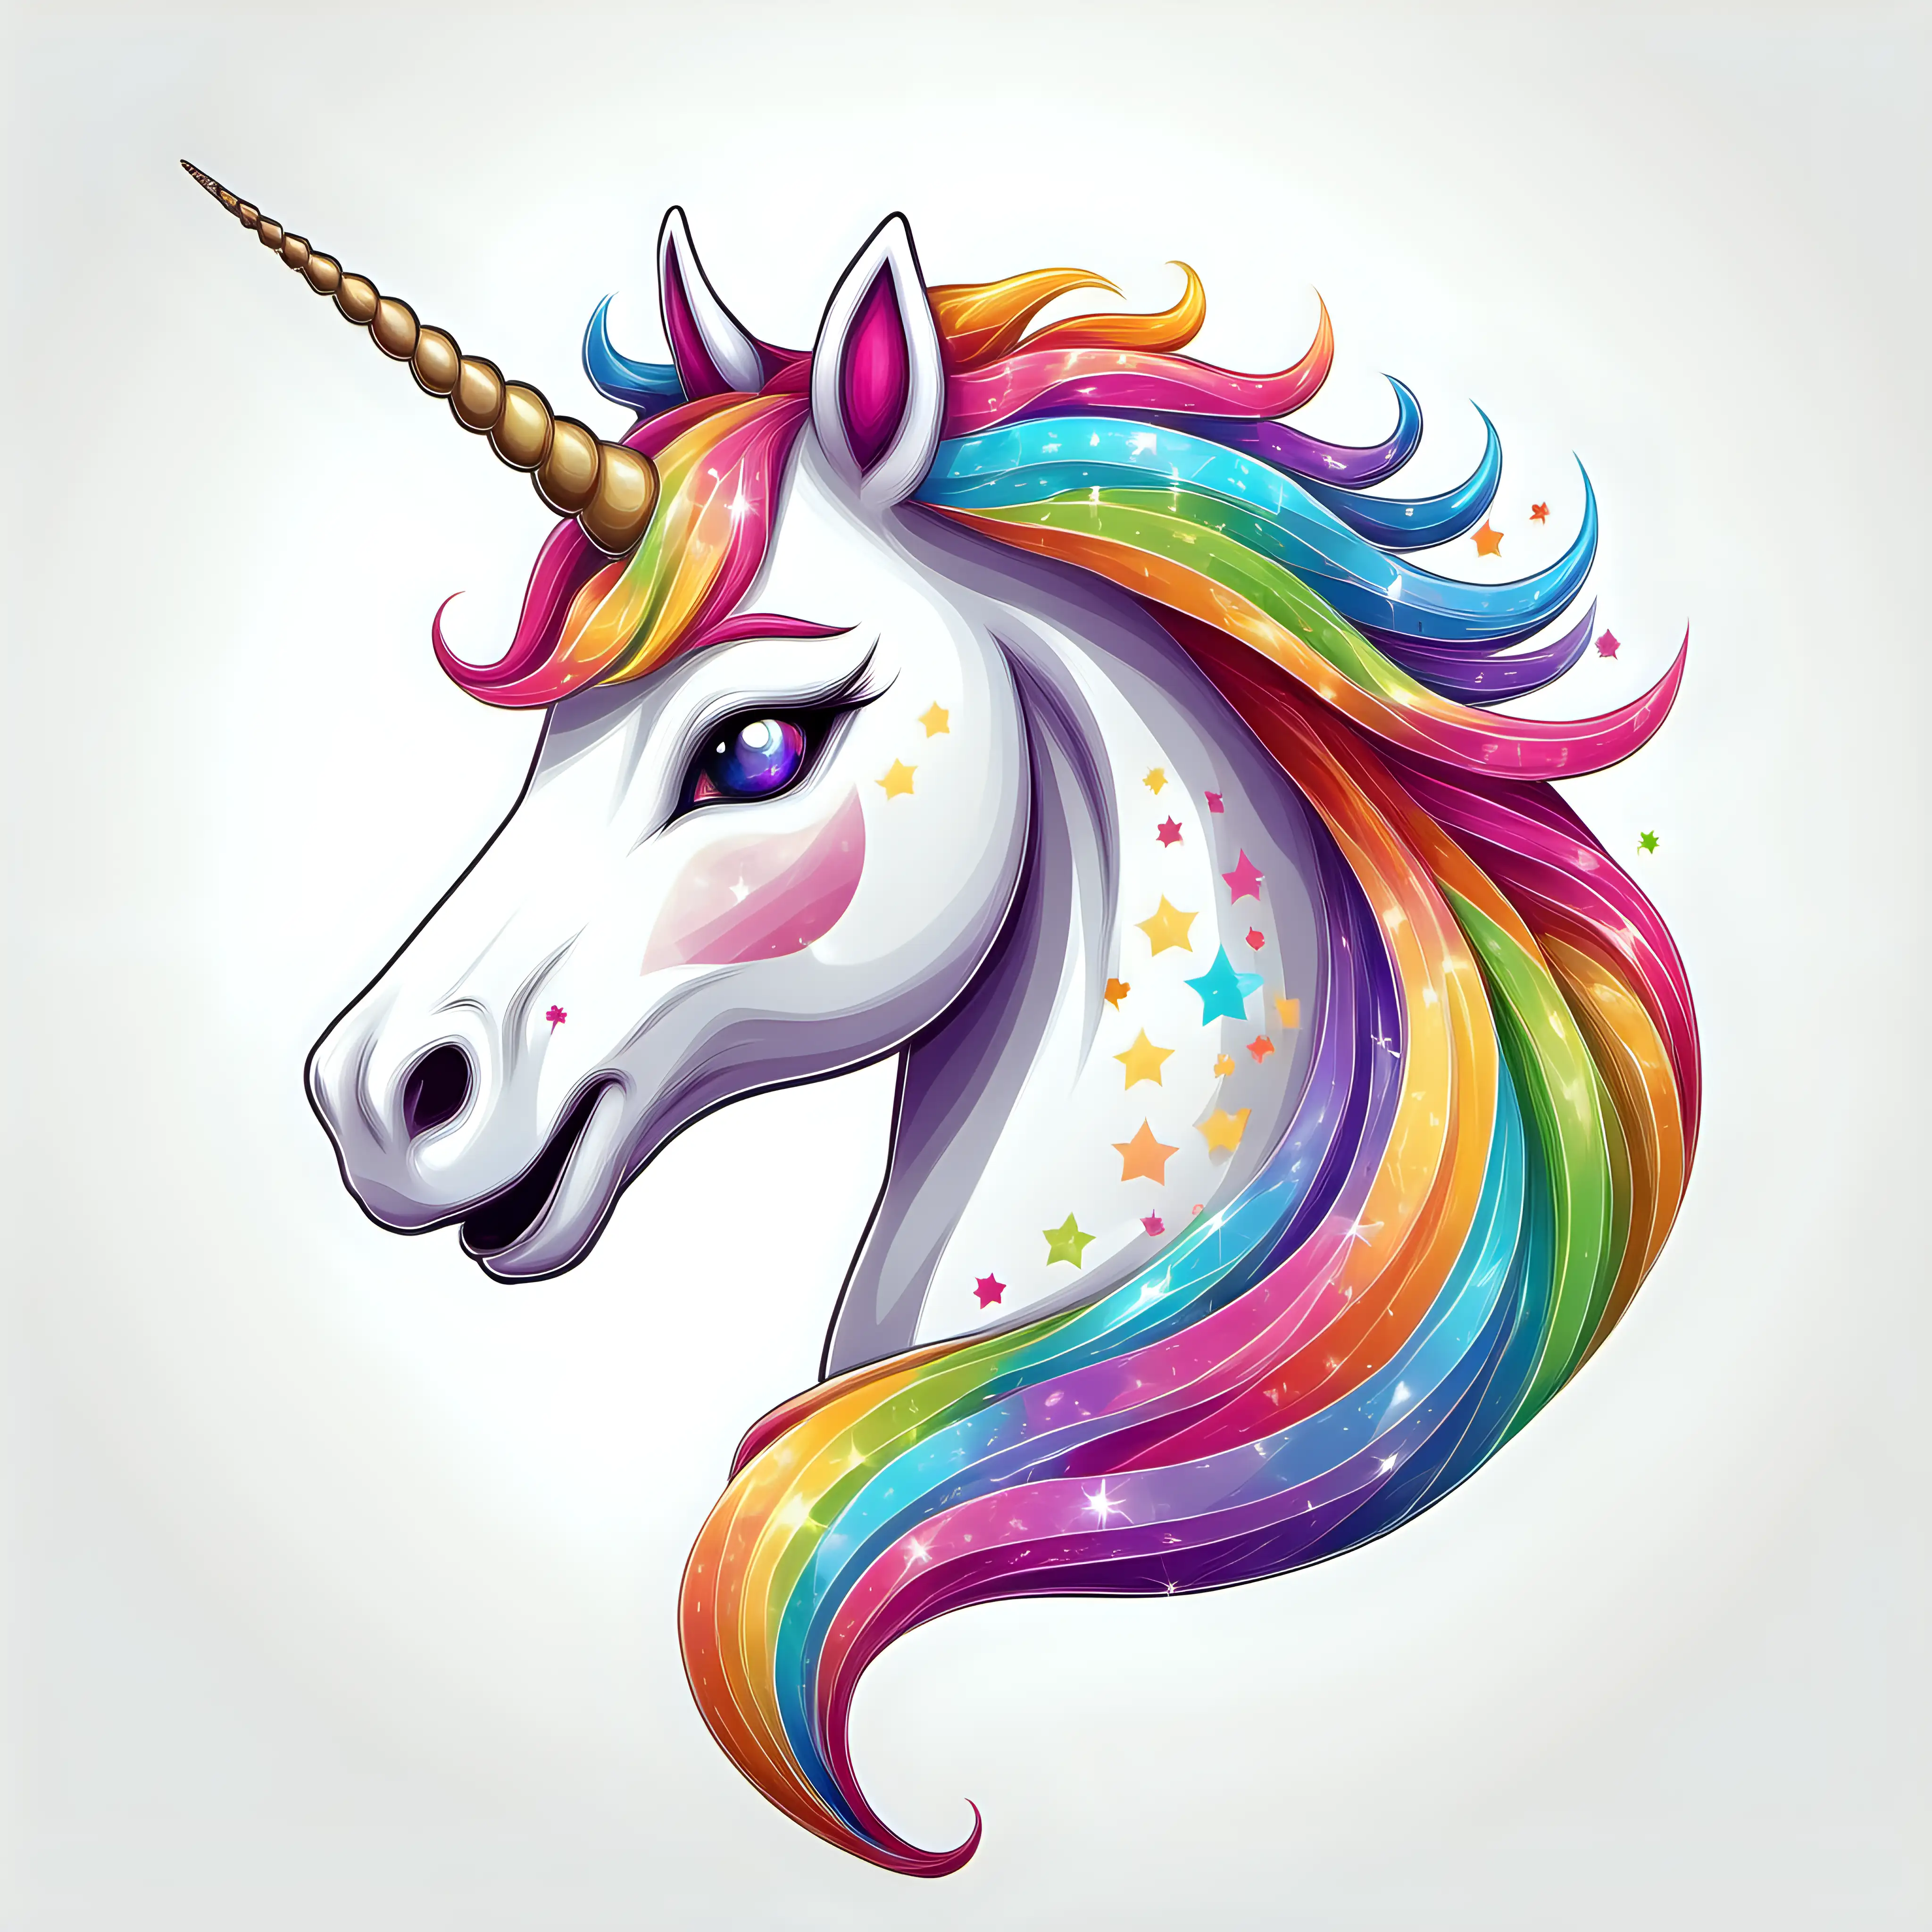 Cheerful Multicolored Unicorn with Flowing Mane and Tail